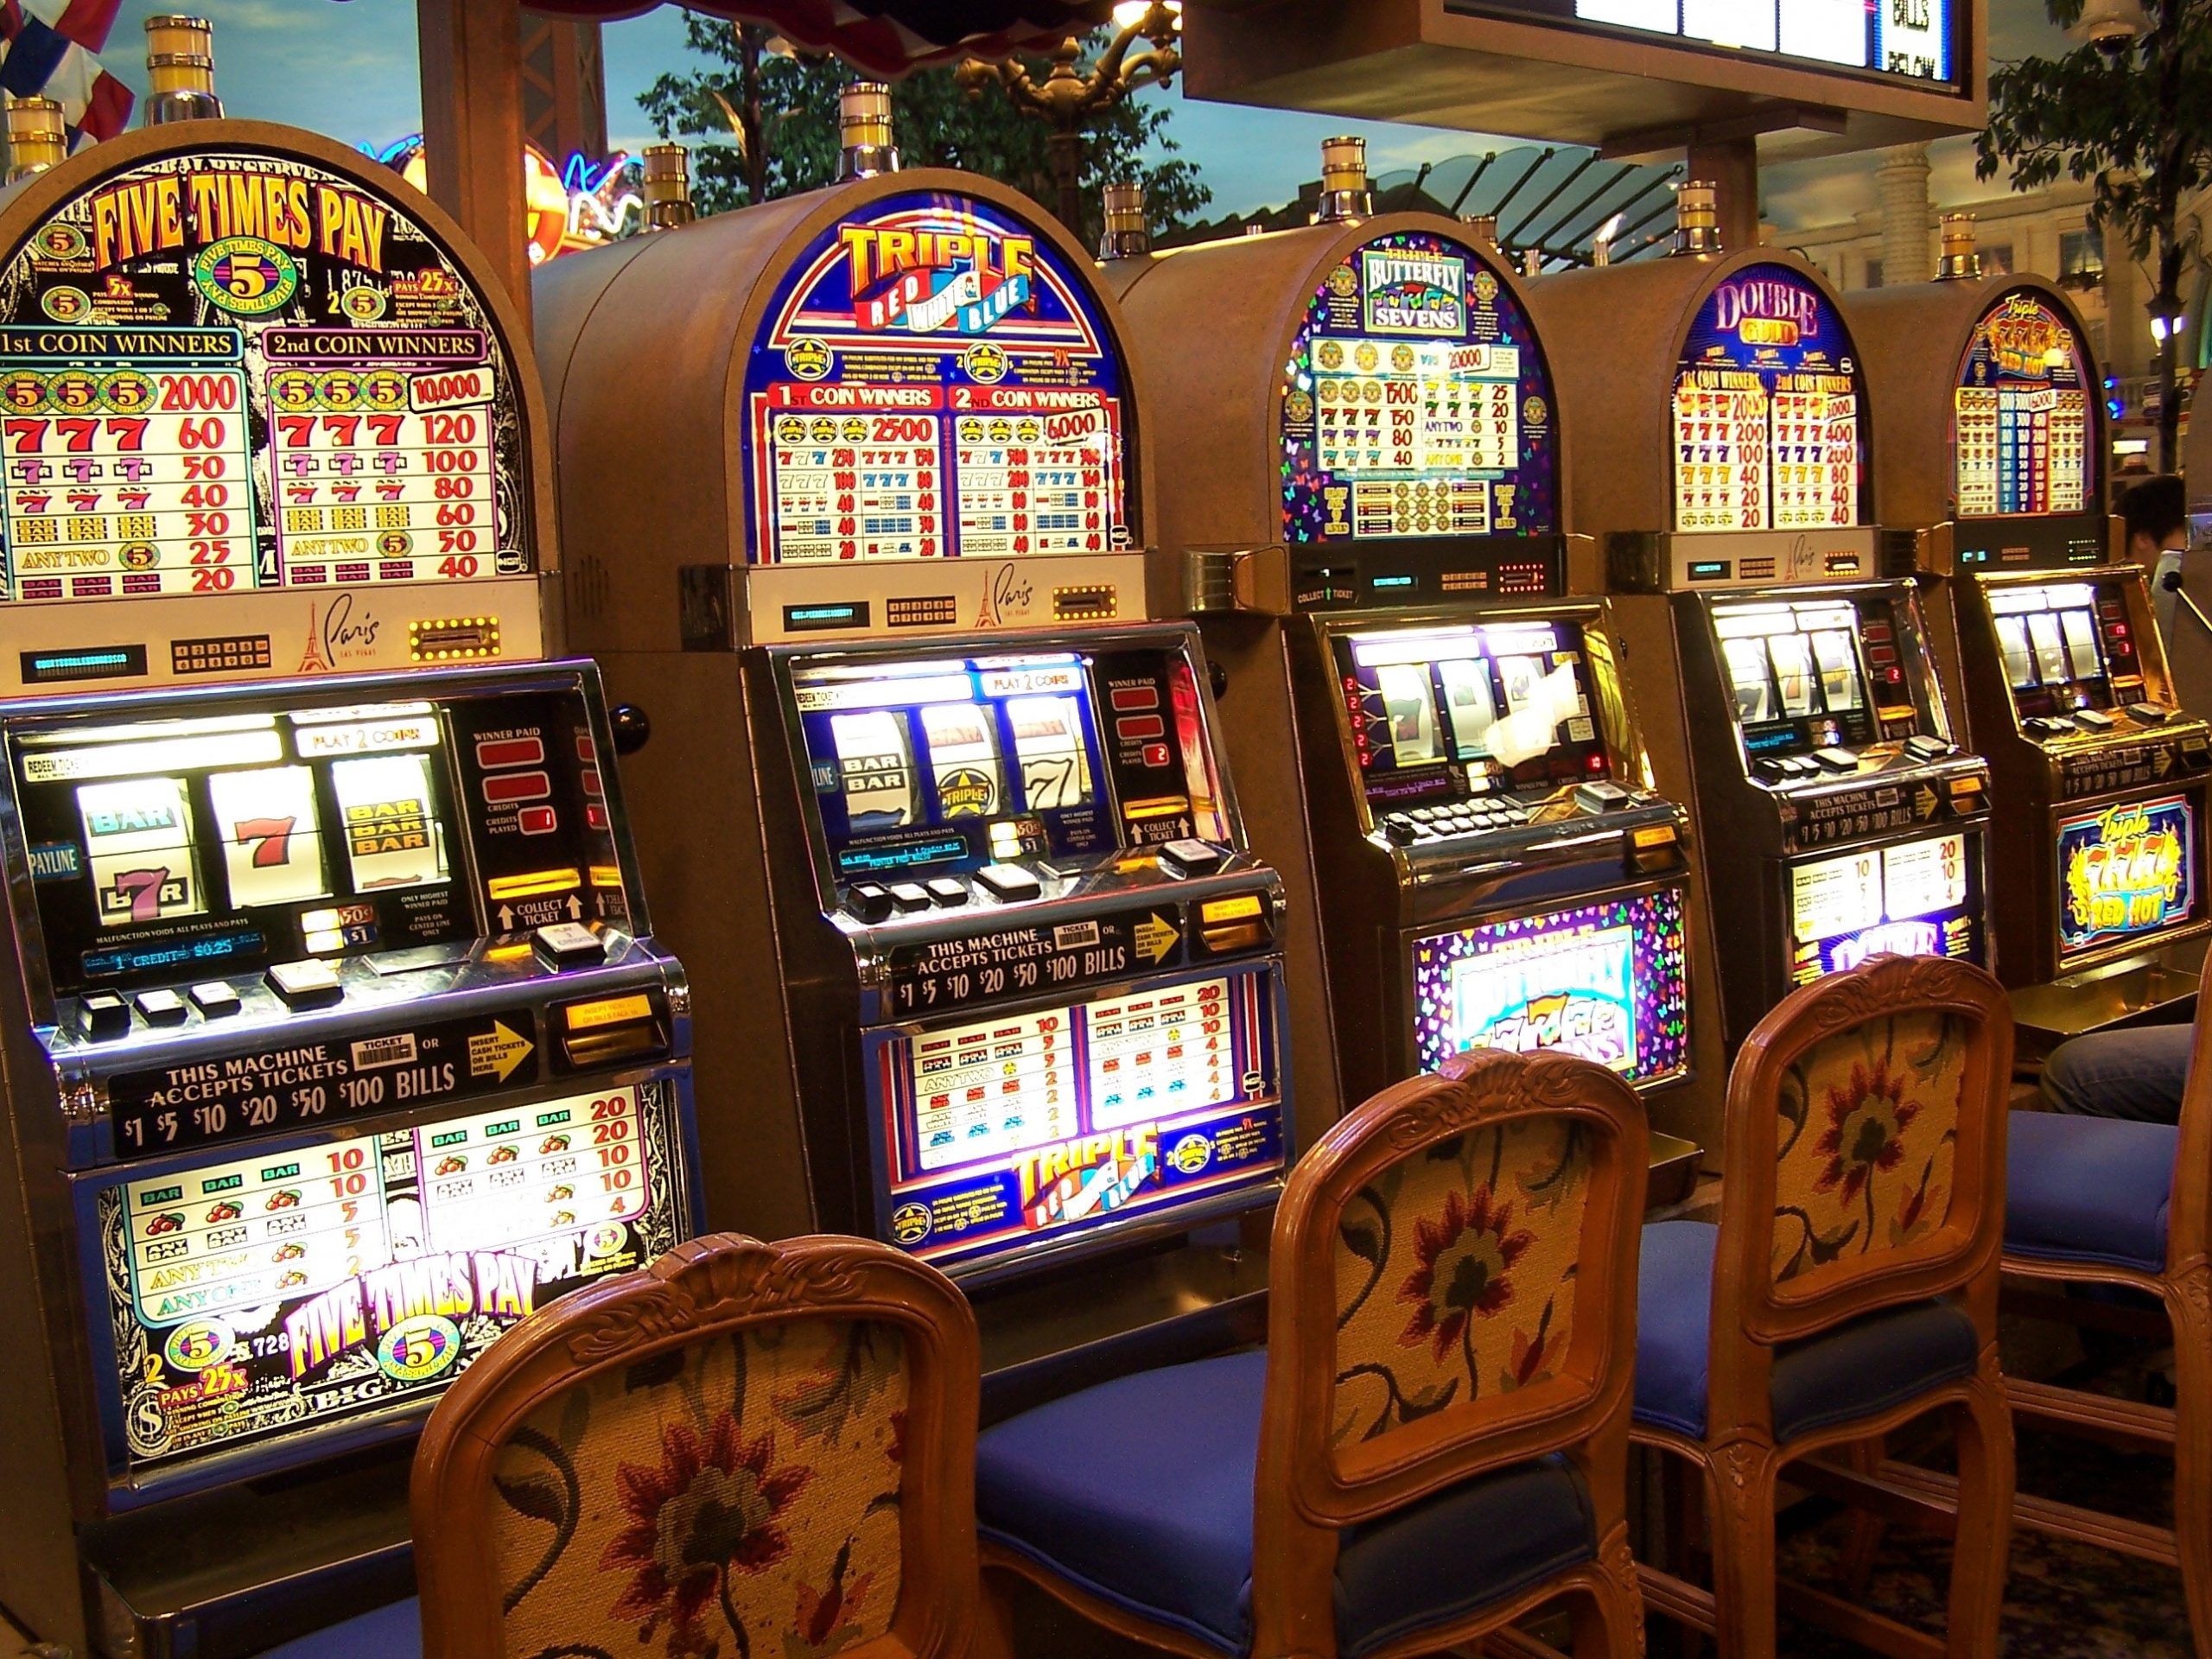 Why Do People Engage in Demo Casino Slot Play?